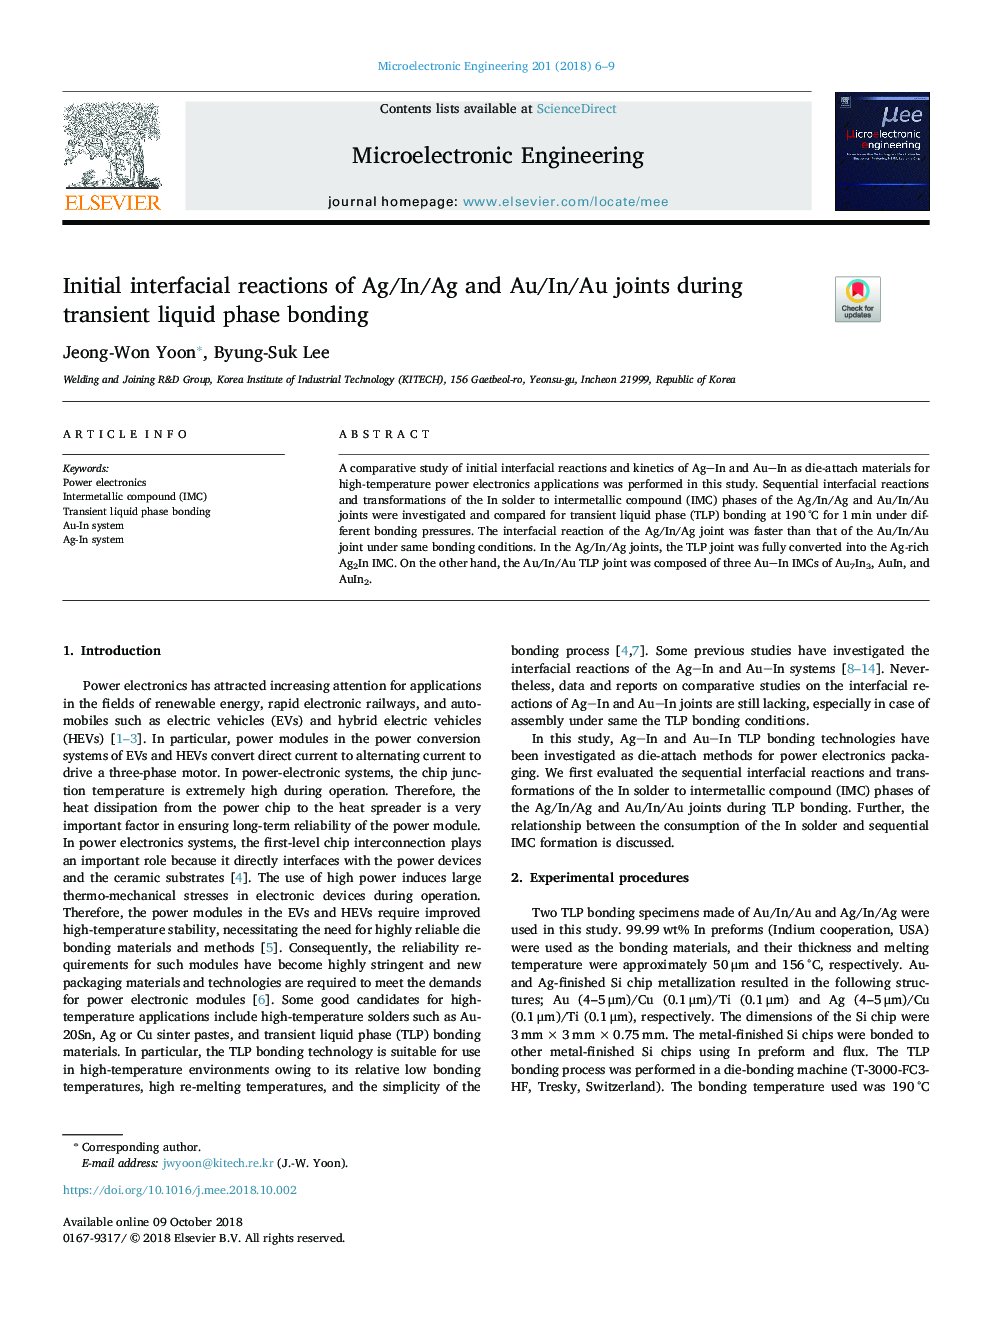 Initial interfacial reactions of Ag/In/Ag and Au/In/Au joints during transient liquid phase bonding